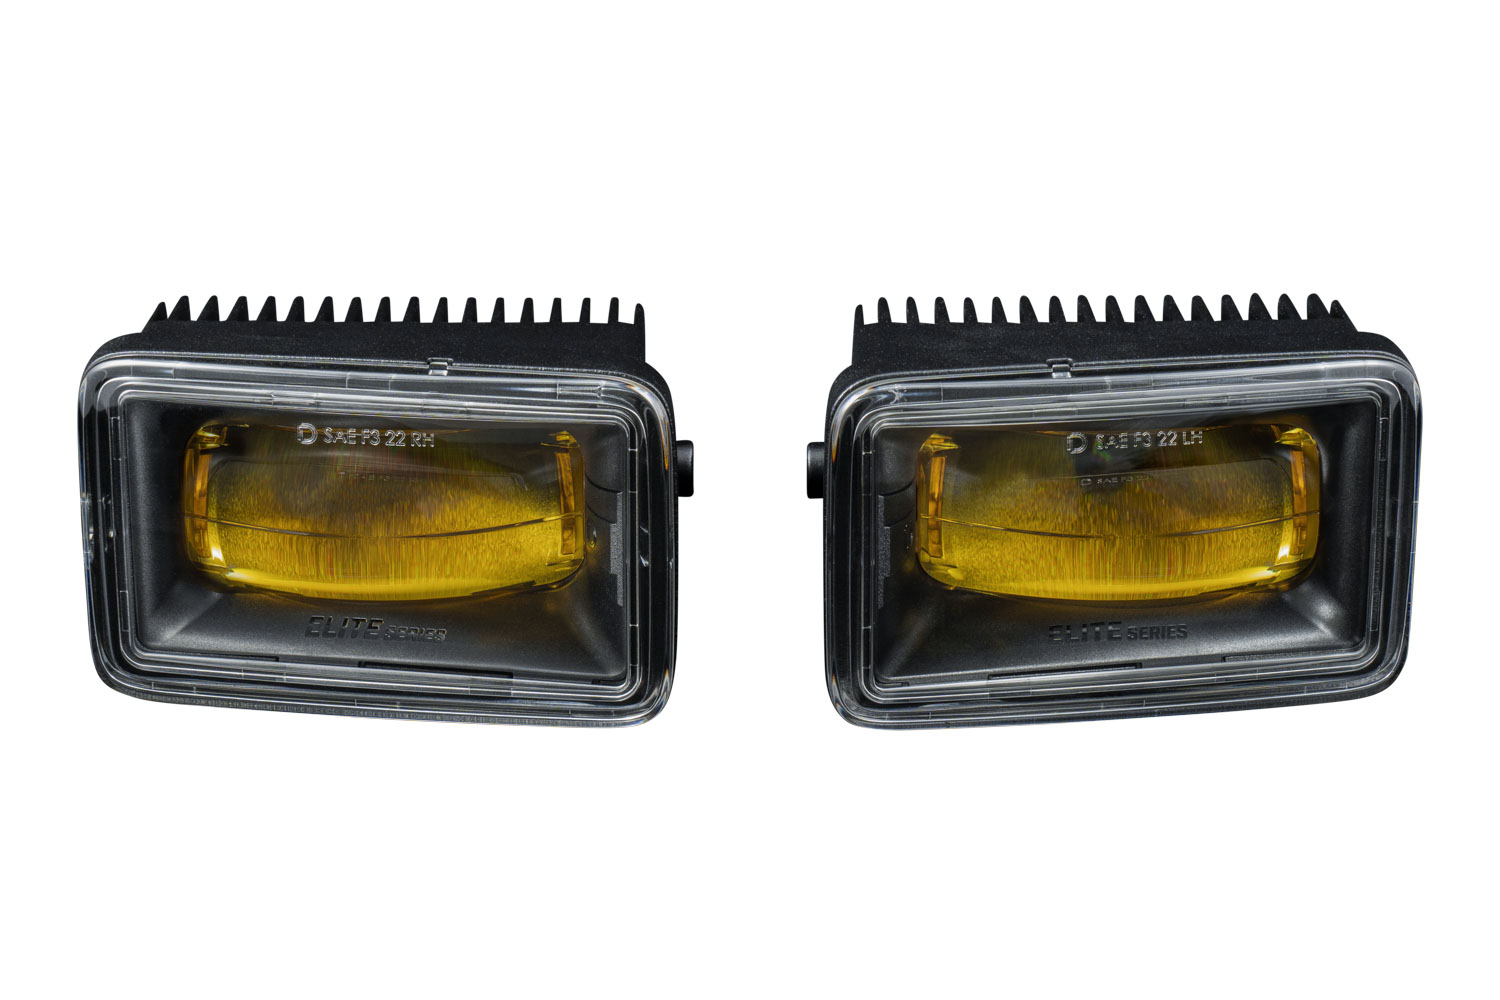 Yellow Elite Series LED Ford Fog Lights for F150 and F250 Super Duty